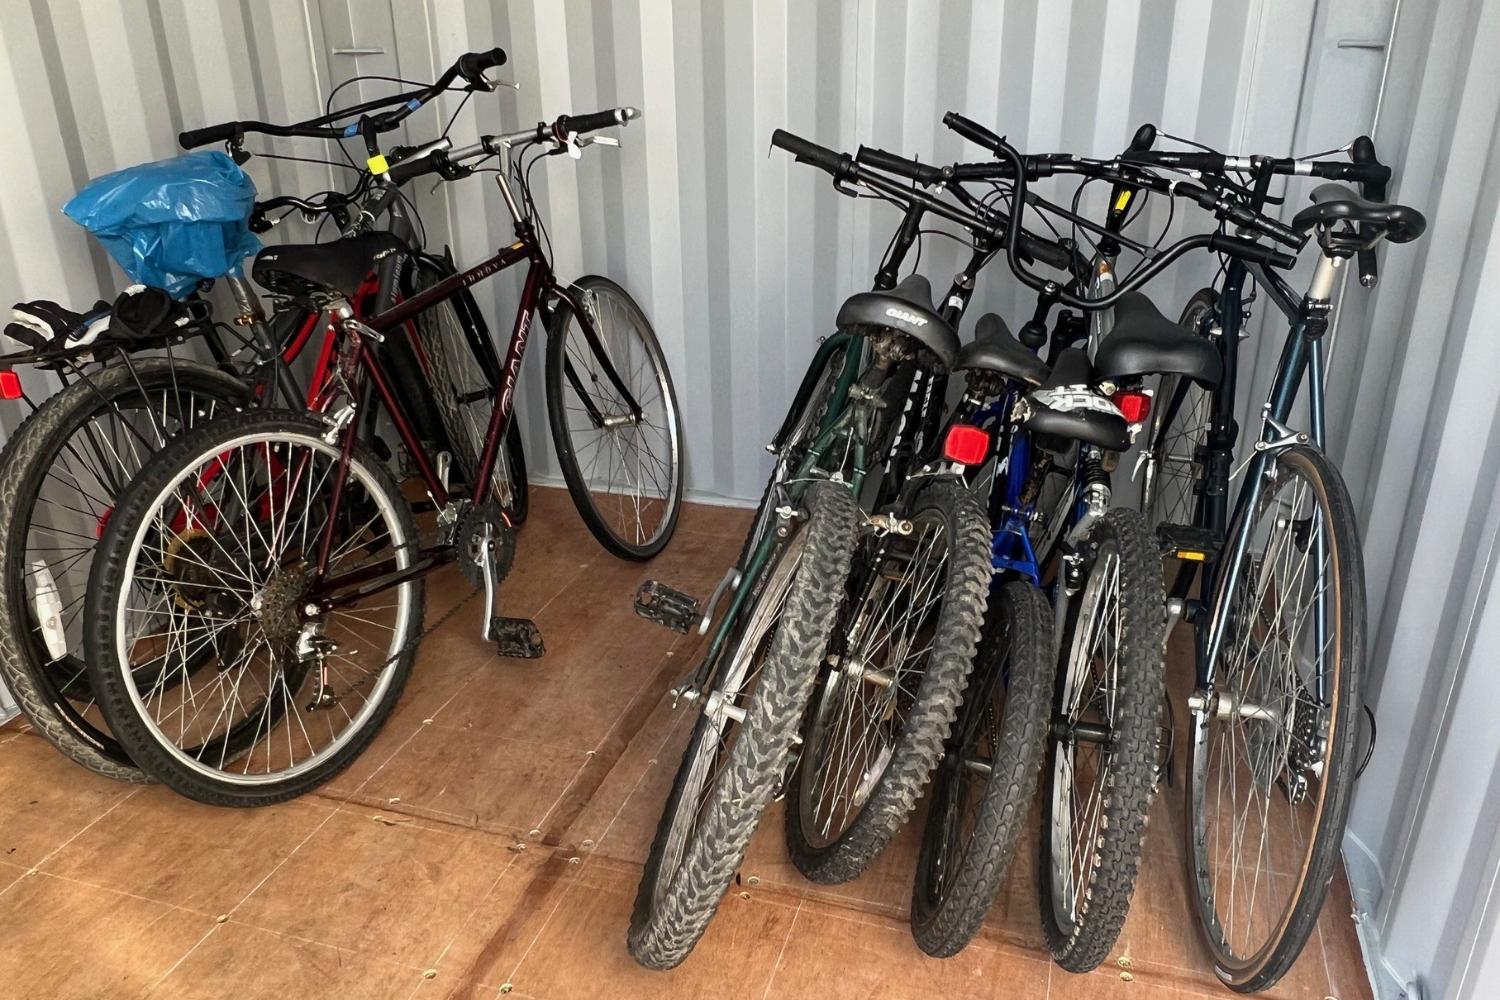 A collection of bikes that are in the RideStore Lost and Found.